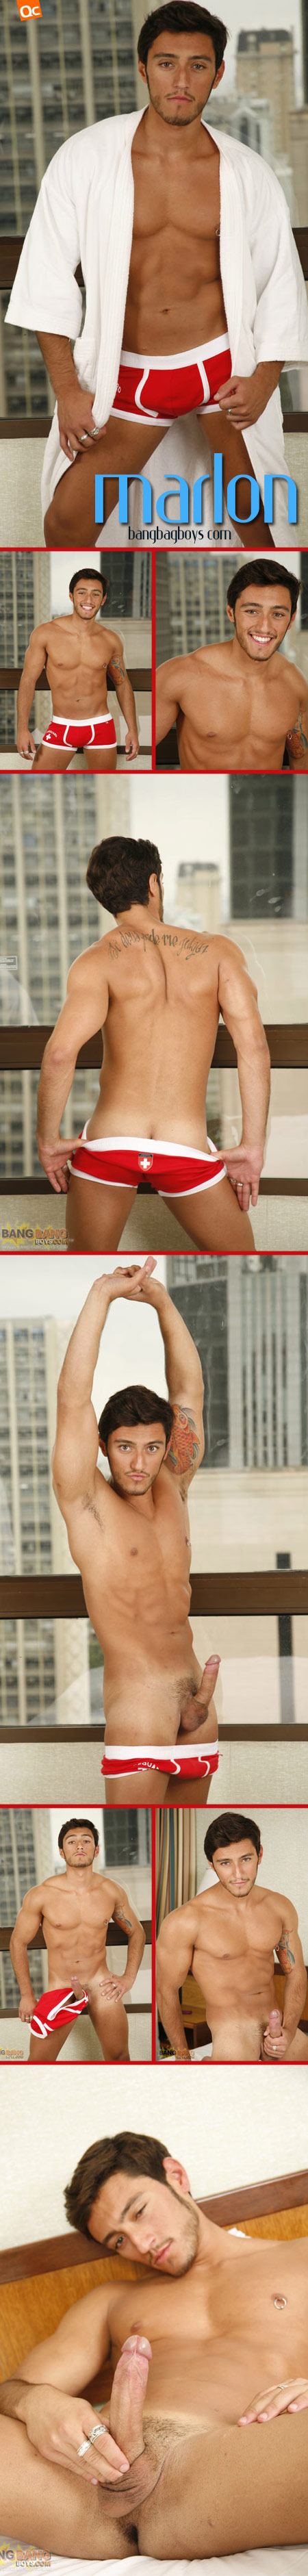 hot gets hotter in the gym and in and out of red undies